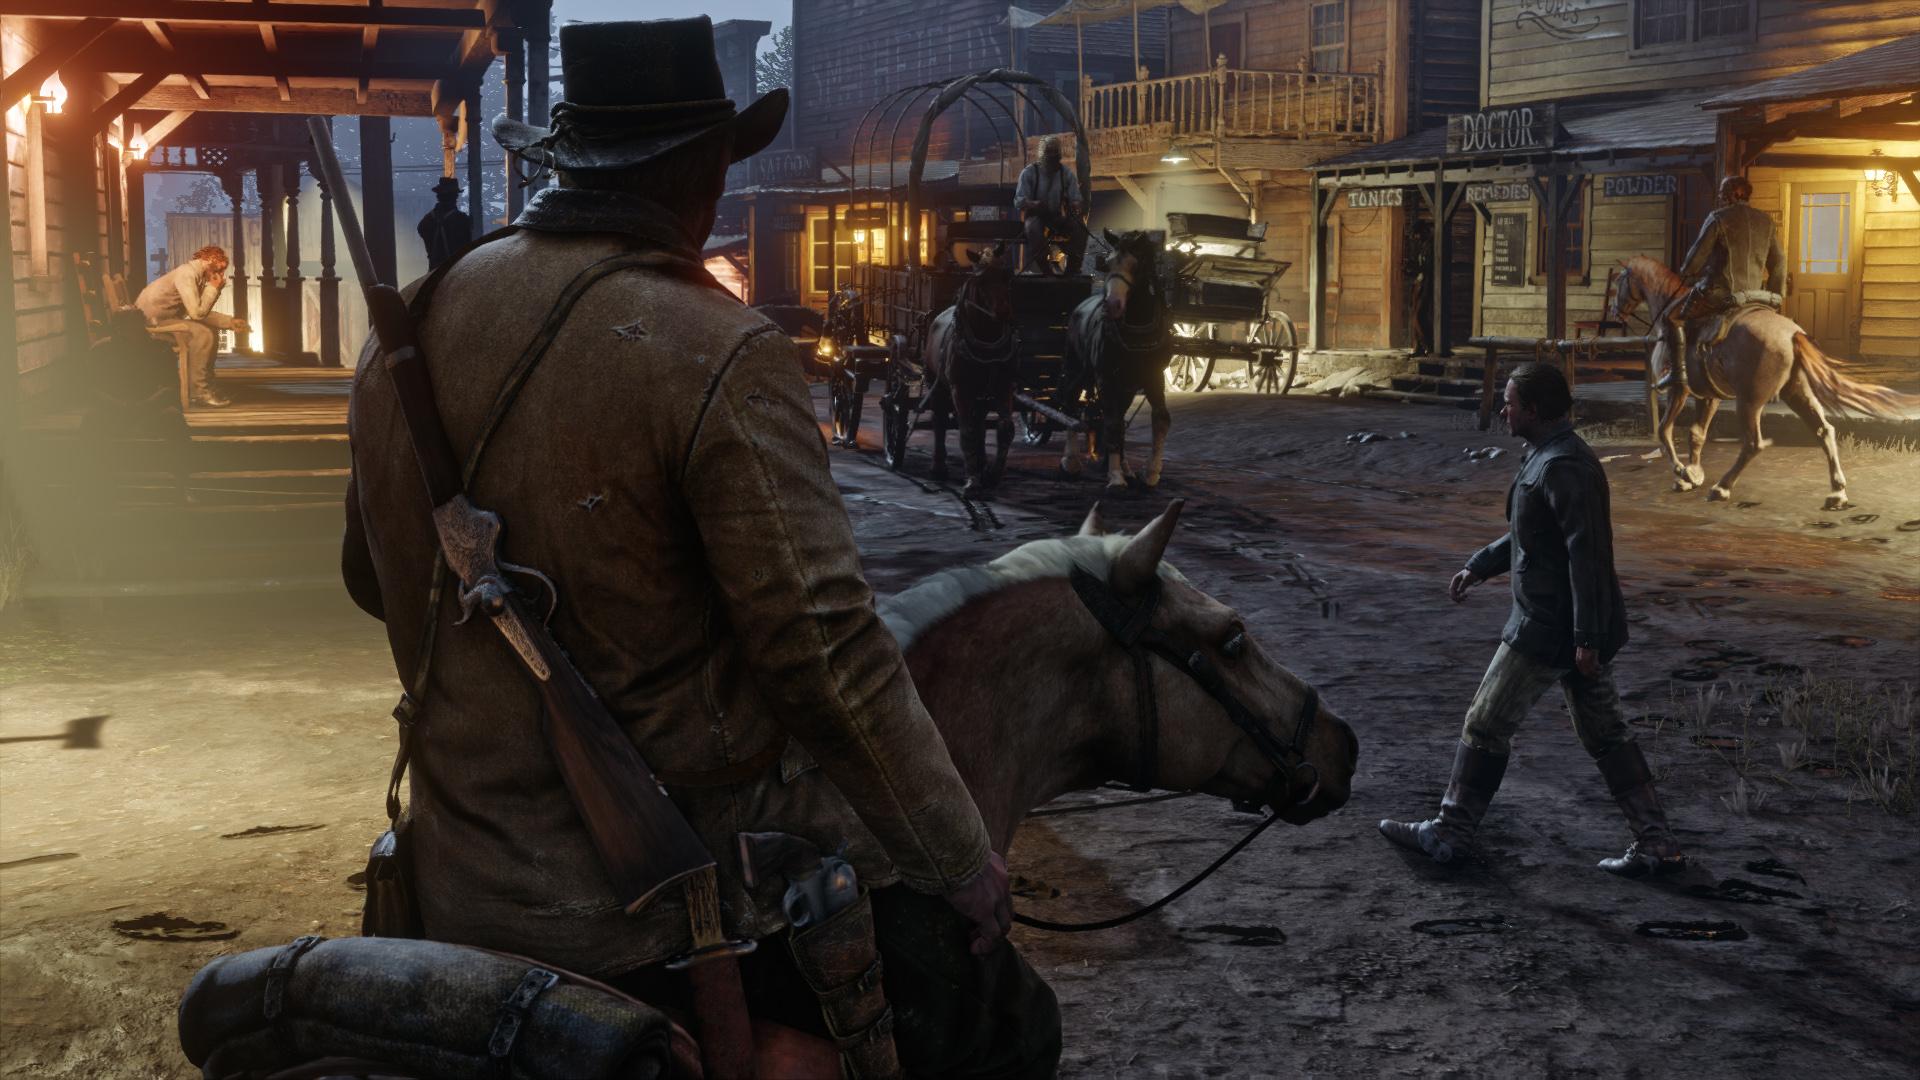 Here's Red Dead Redemption 2's newest trailer